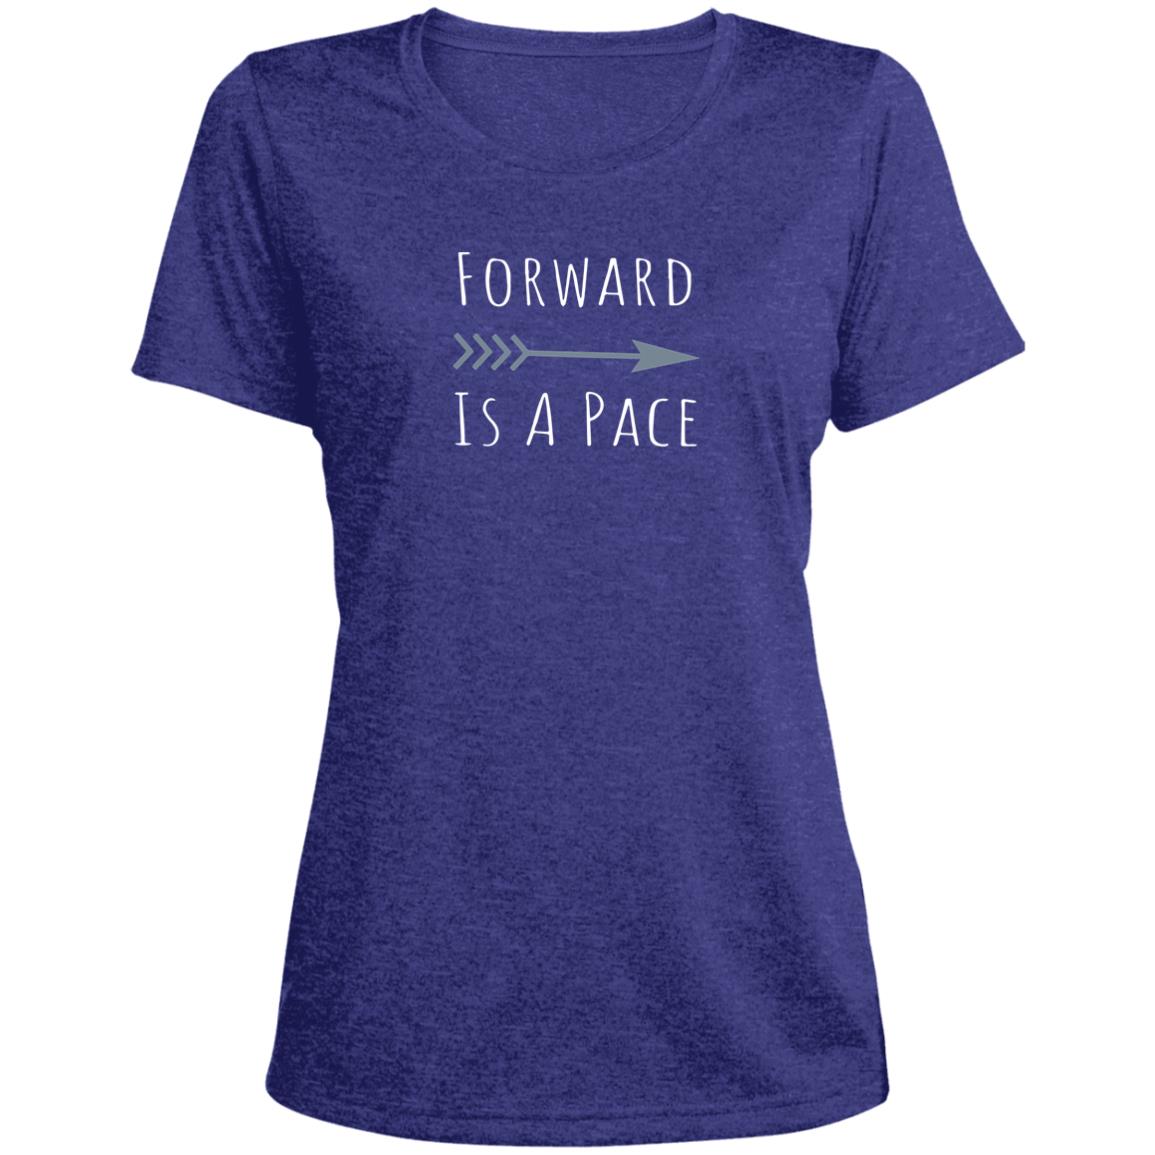 Forward is a pace Women's Performance Tee